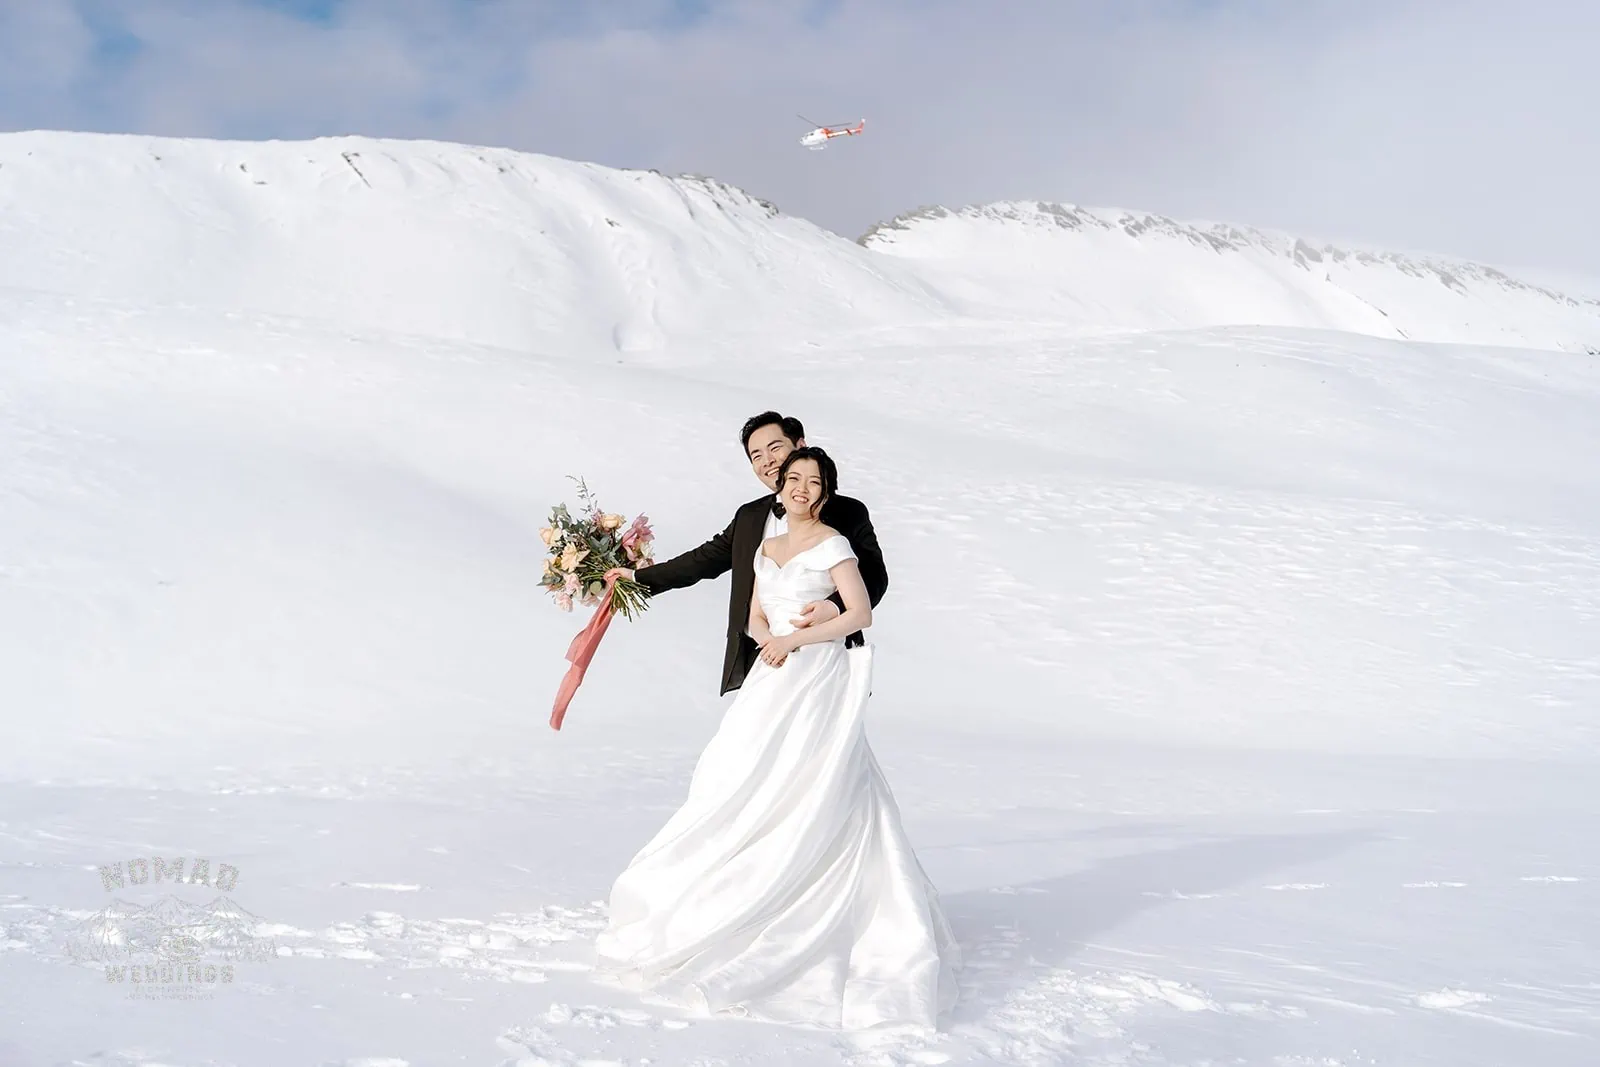 Queenstown New Zealand Elopement Wedding Photographer - Bo and Junyi's pre-wedding shoot in the snow featuring 4 helicopter landings.